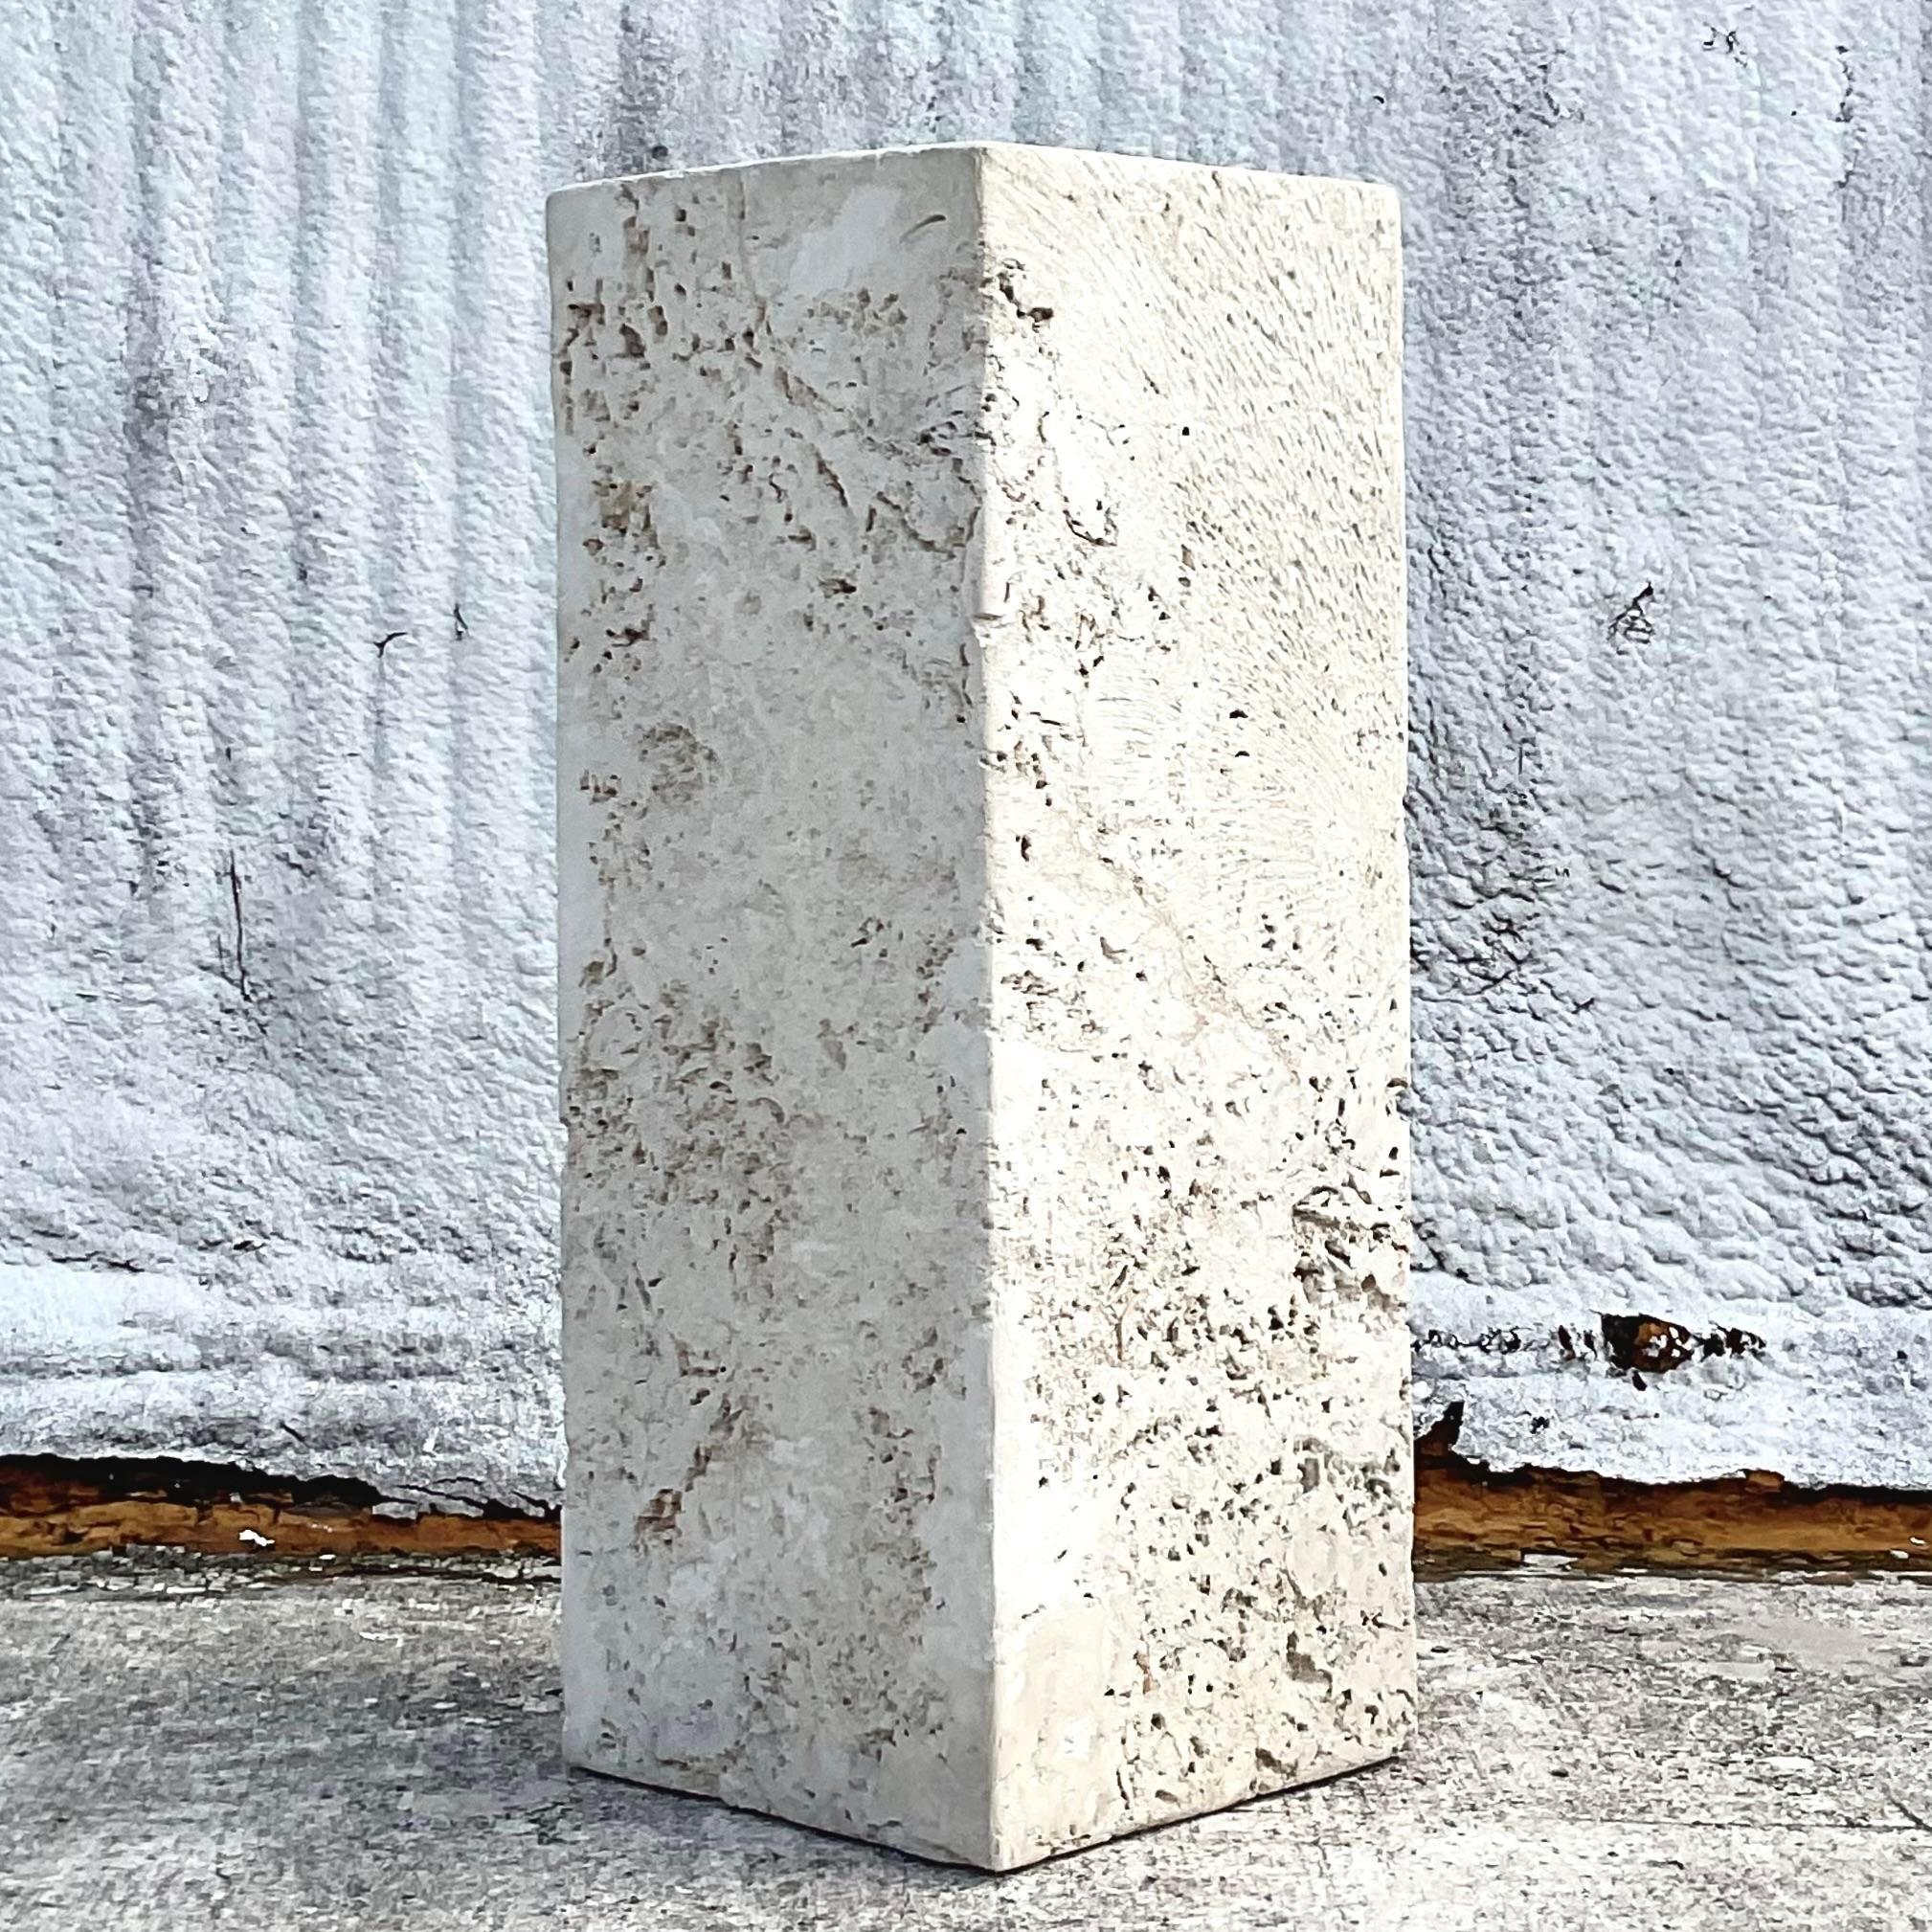 A fantastic vintage Coastal pedestal. A striking solid Coquina stone body in a chic and simple design. Incredible organic detail. Two pedestals available on my Chairish page. Acquired from a Palm Beach estate.